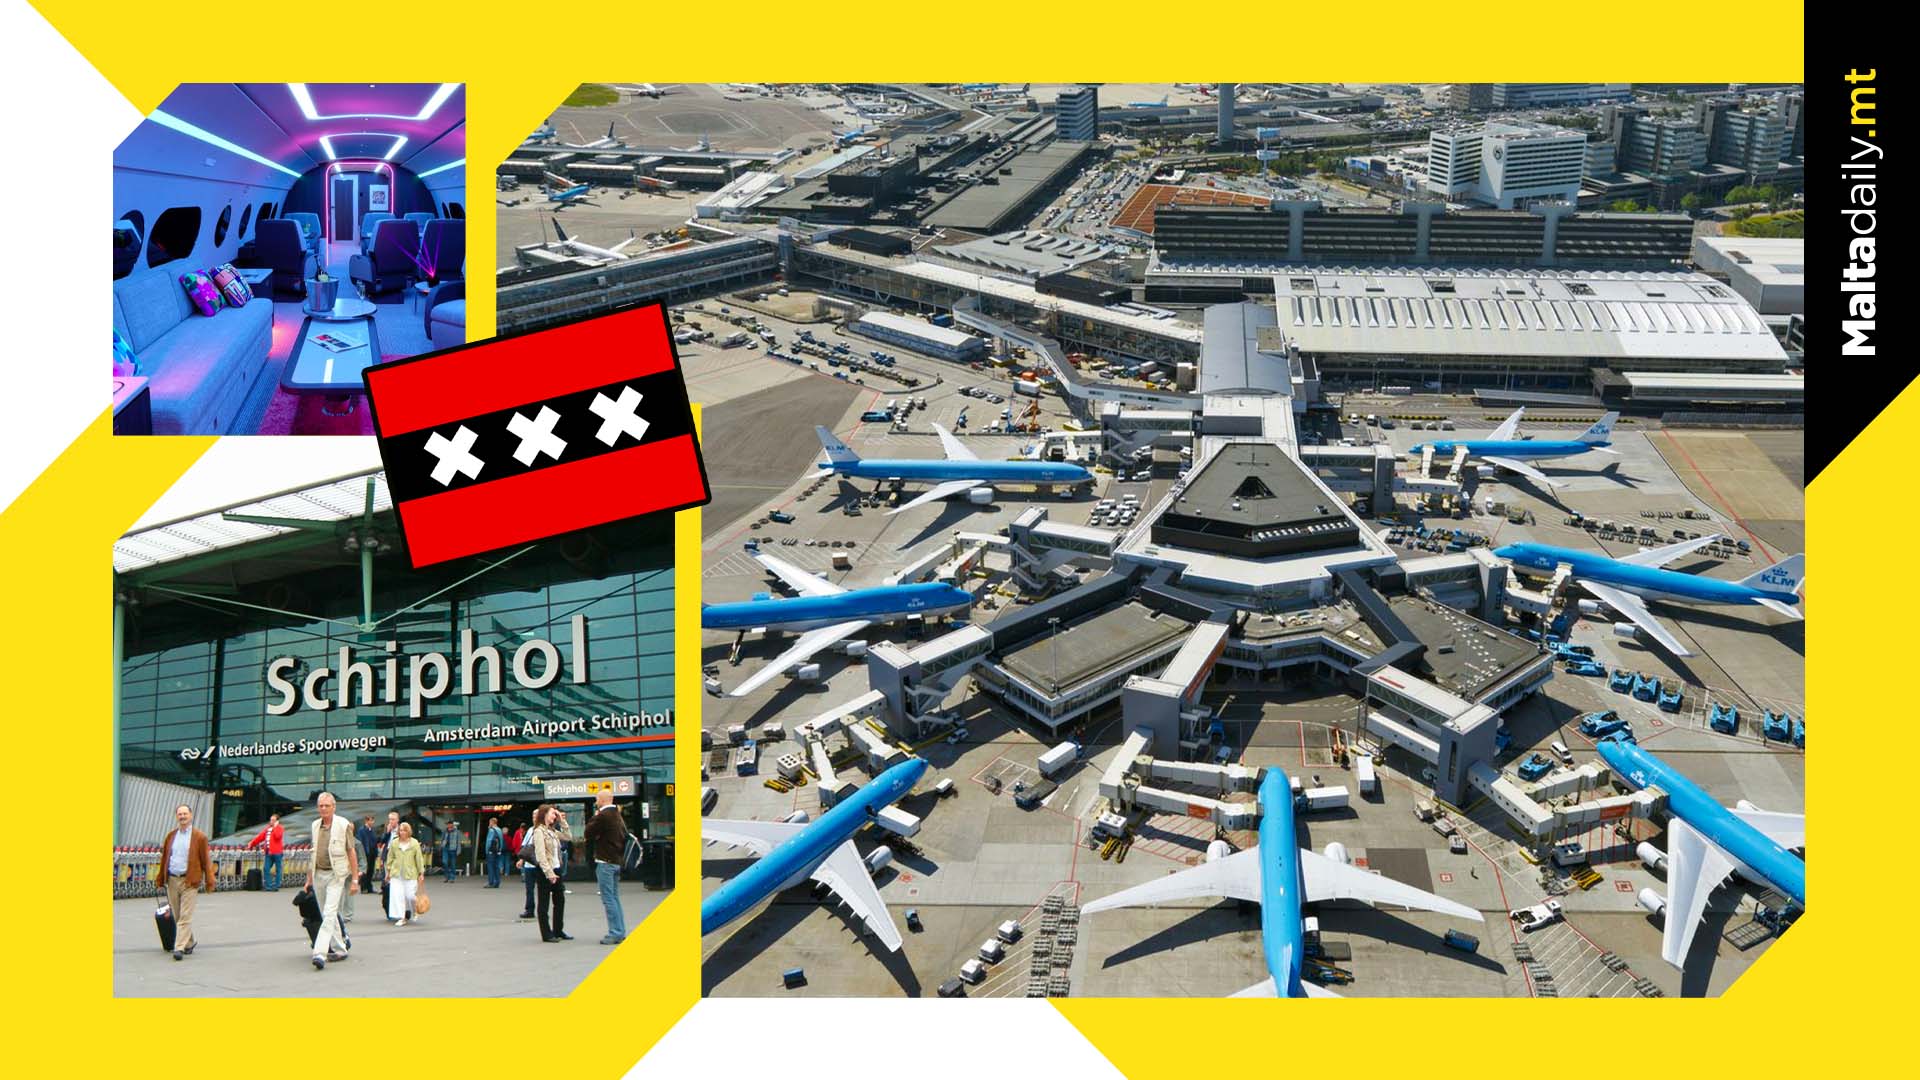 Private jets might no longer land in Amsterdam's Schiphol Airport